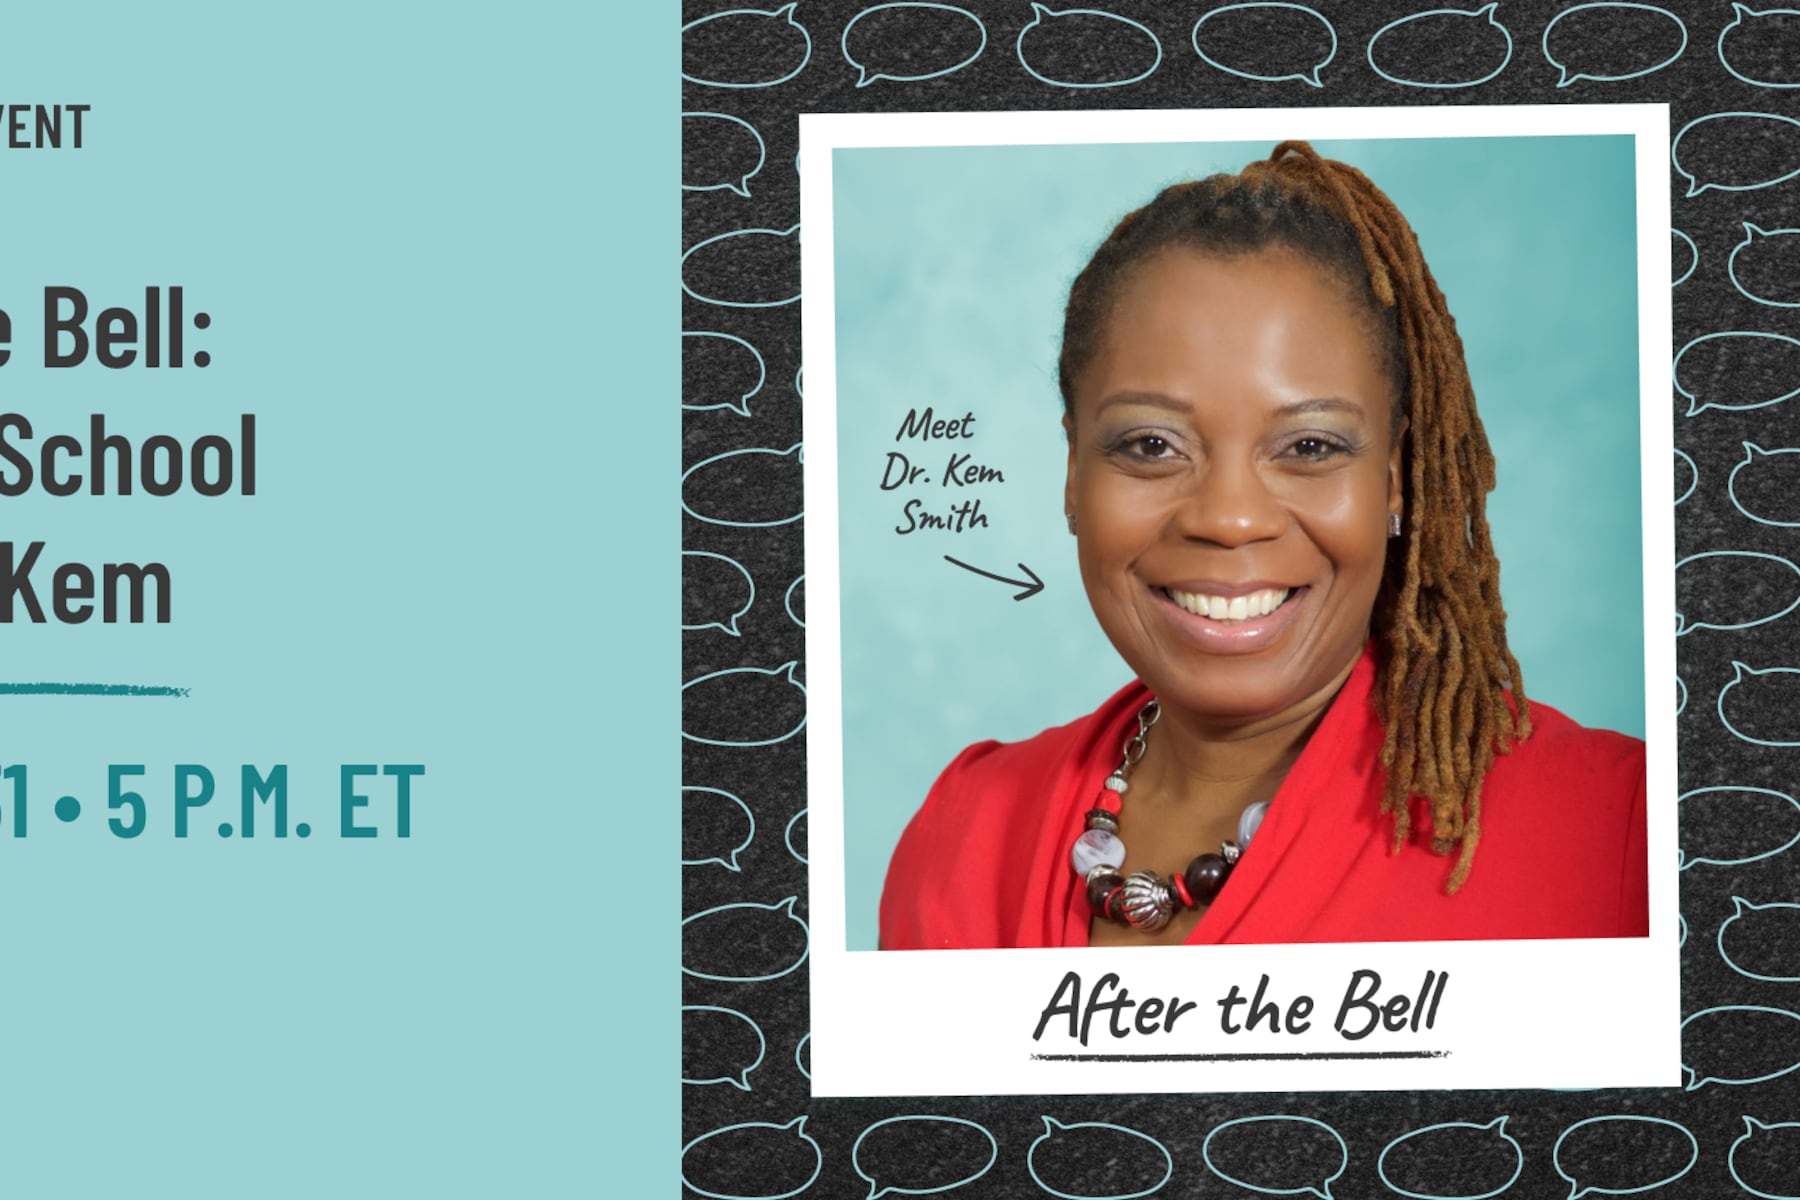 Promotional event graphic for “After the Bell: Back to School with Dr. Kem” on August 31, 2022.